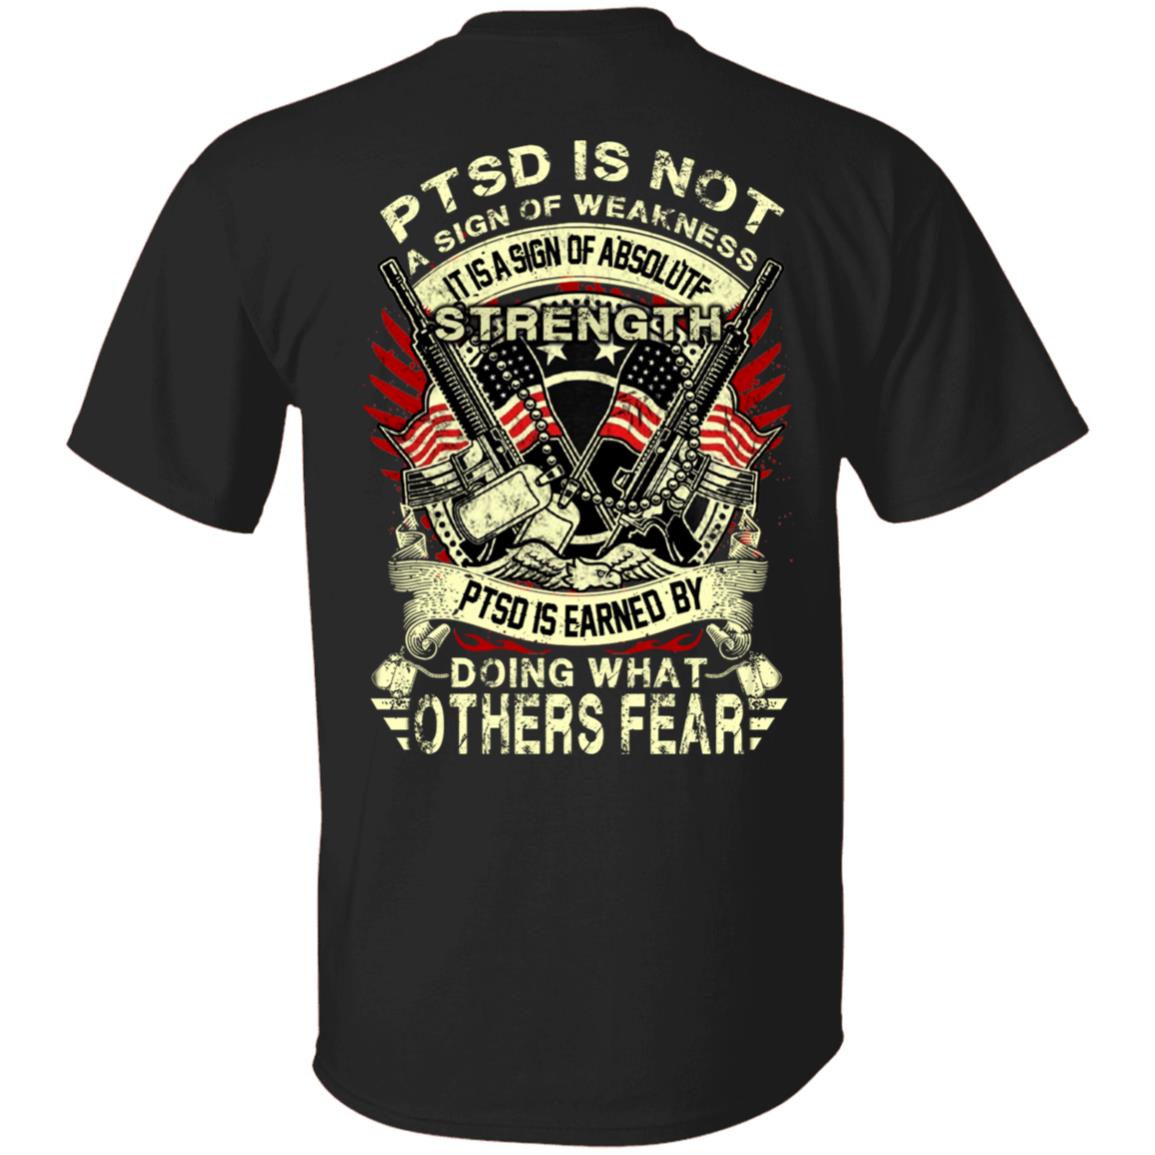 PTSD is Not A Sign of Weakness It is a Sign of Absolute Strength US Flag Shirt